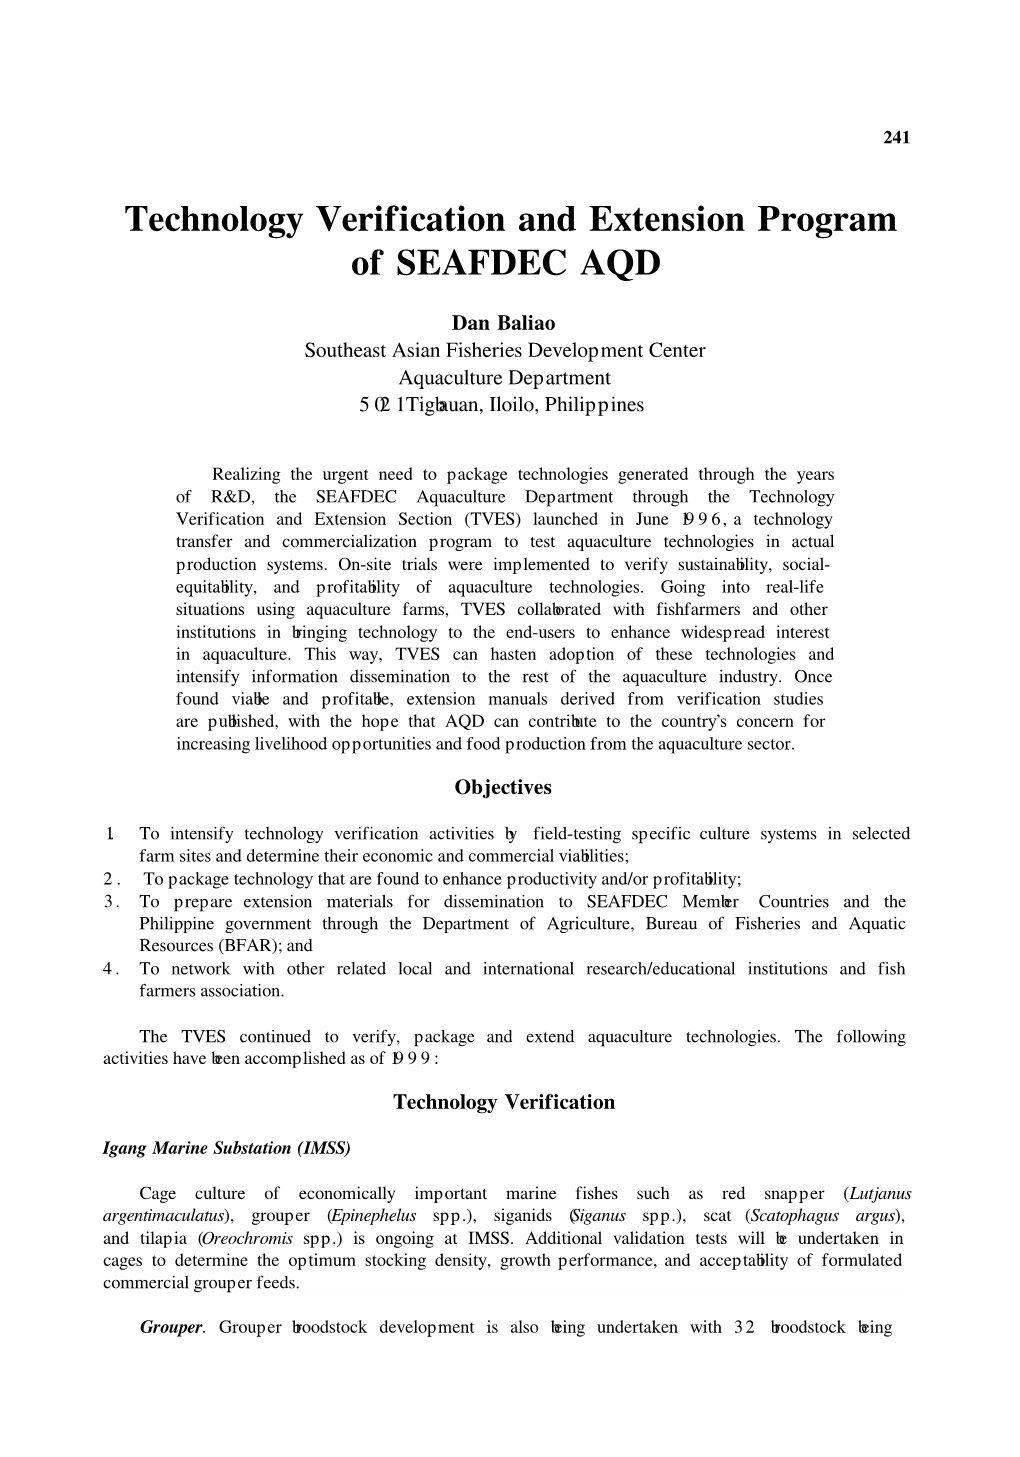 Technology Verification and Extension Program of SEAFDEC AQD